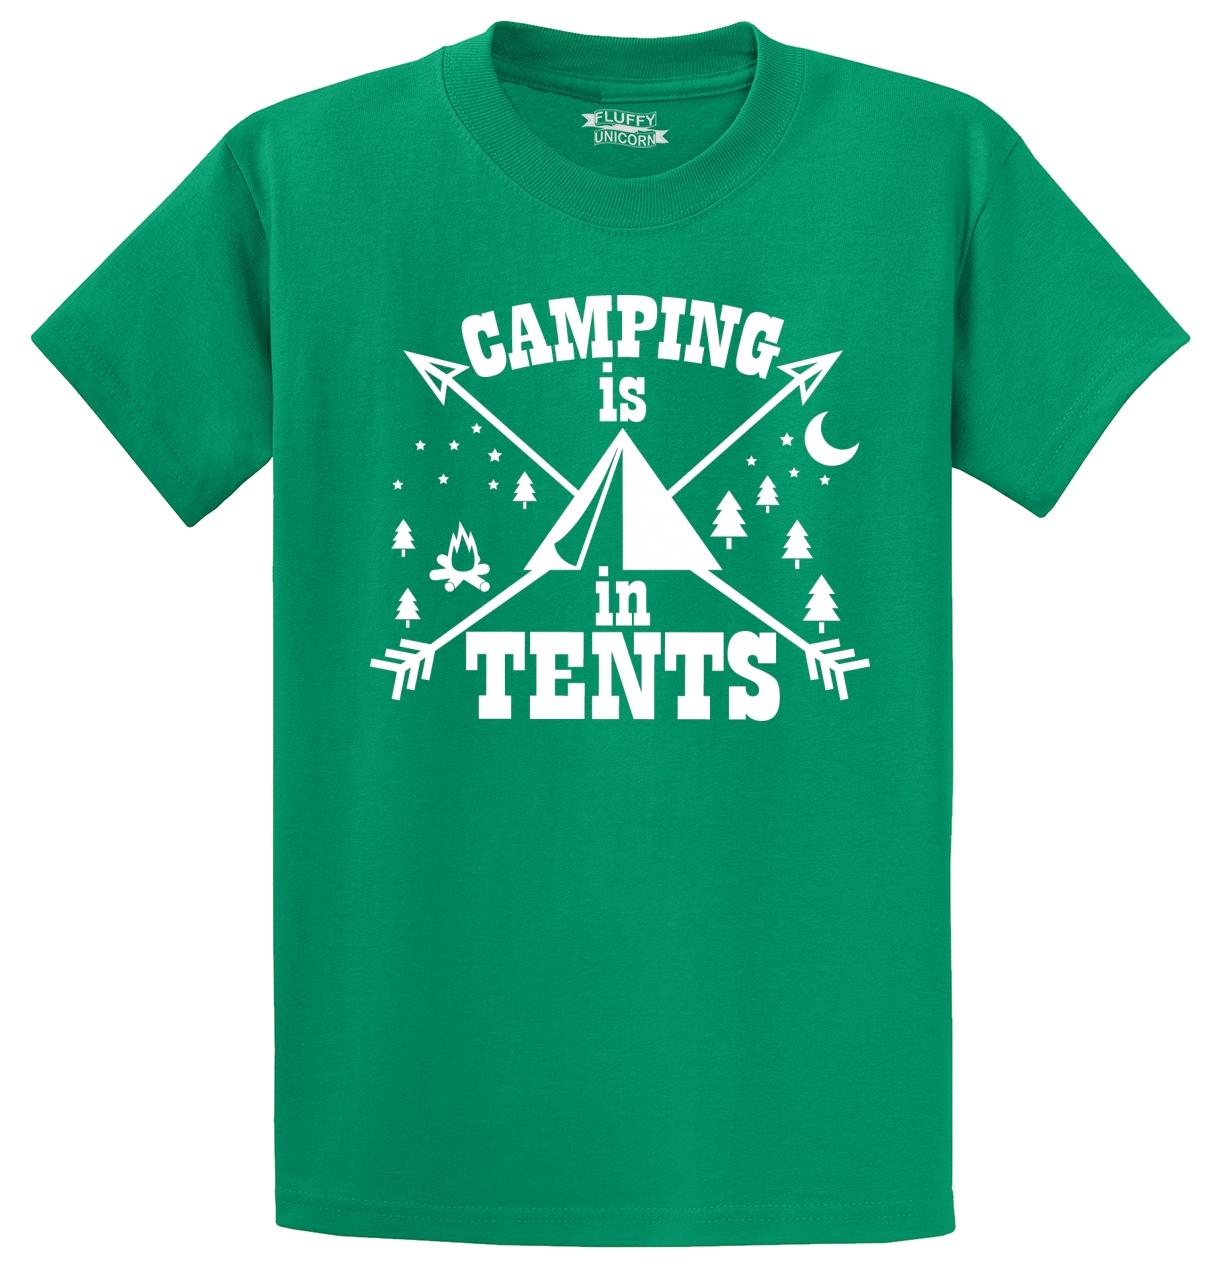 Mens Camping Is In Tents T-Shirt Camper Outdoors Spoof Graphic Shirt | eBay